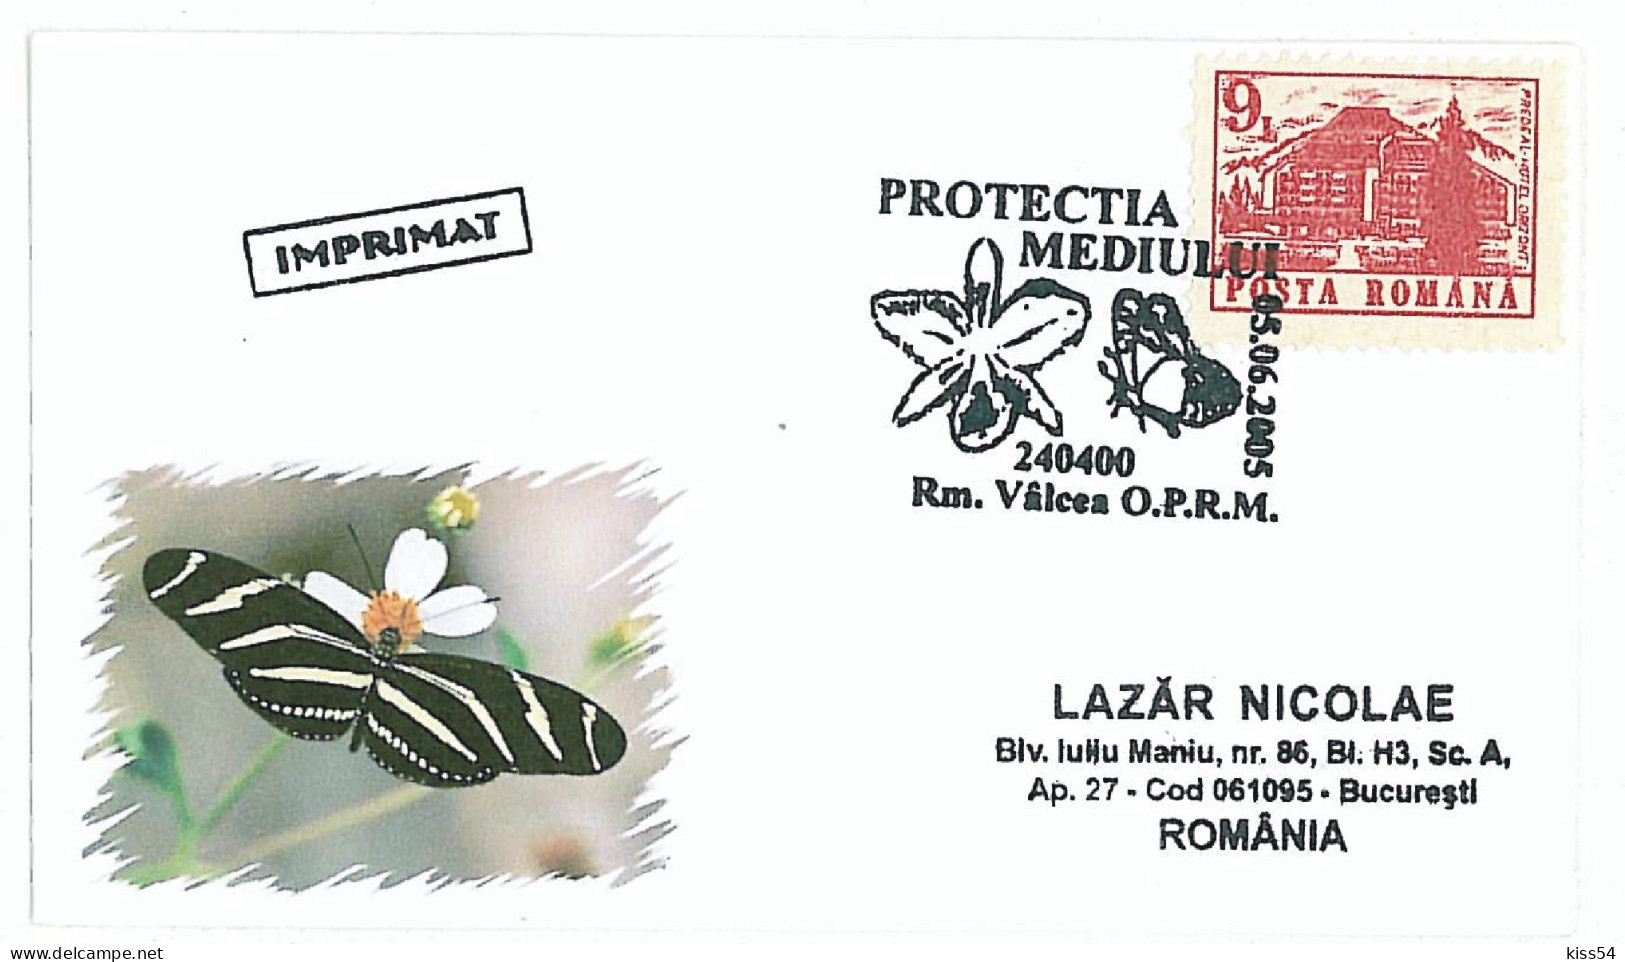 COV 22 - 1226-a, BUTTERFLY, Environmental Protection, Romania - Lilliput Cover - Used - 2005 - Cartes-maximum (CM)